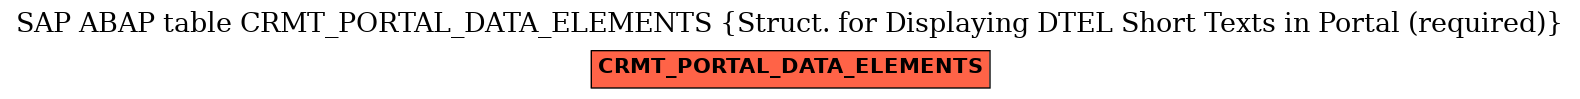 E-R Diagram for table CRMT_PORTAL_DATA_ELEMENTS (Struct. for Displaying DTEL Short Texts in Portal (required))